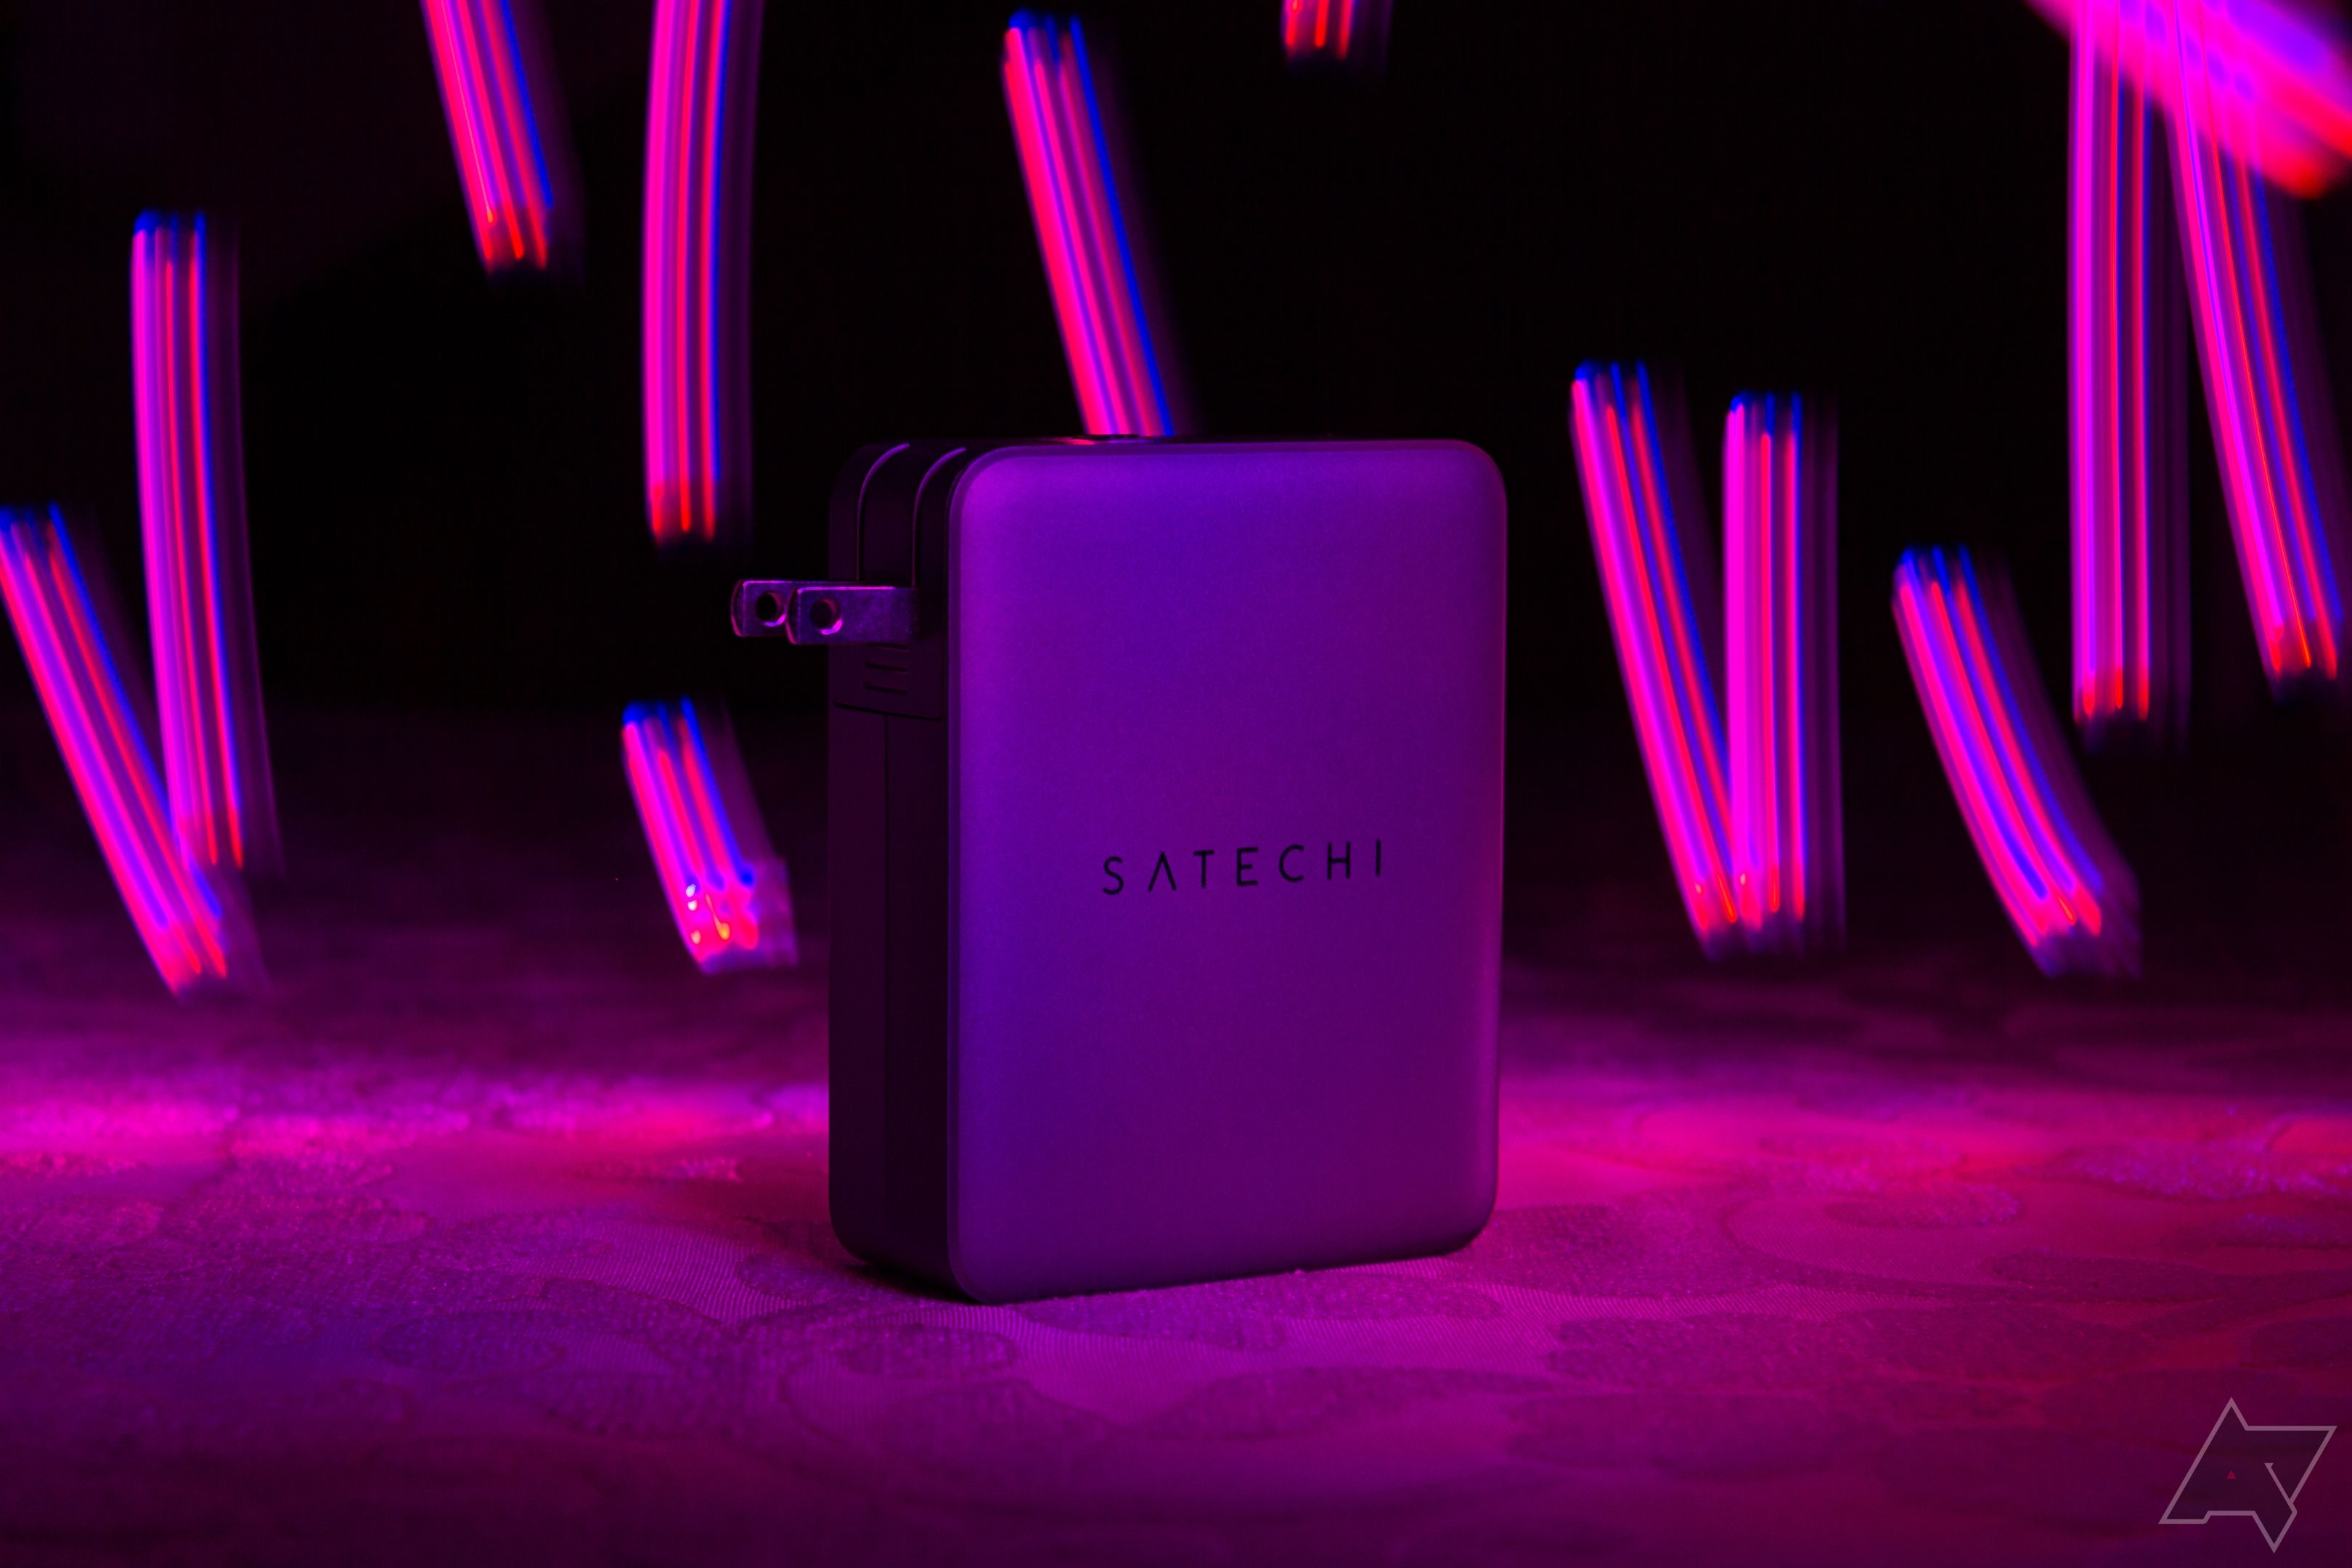 The Satechi 145W GaN travel charger with swirling purple lights in the background